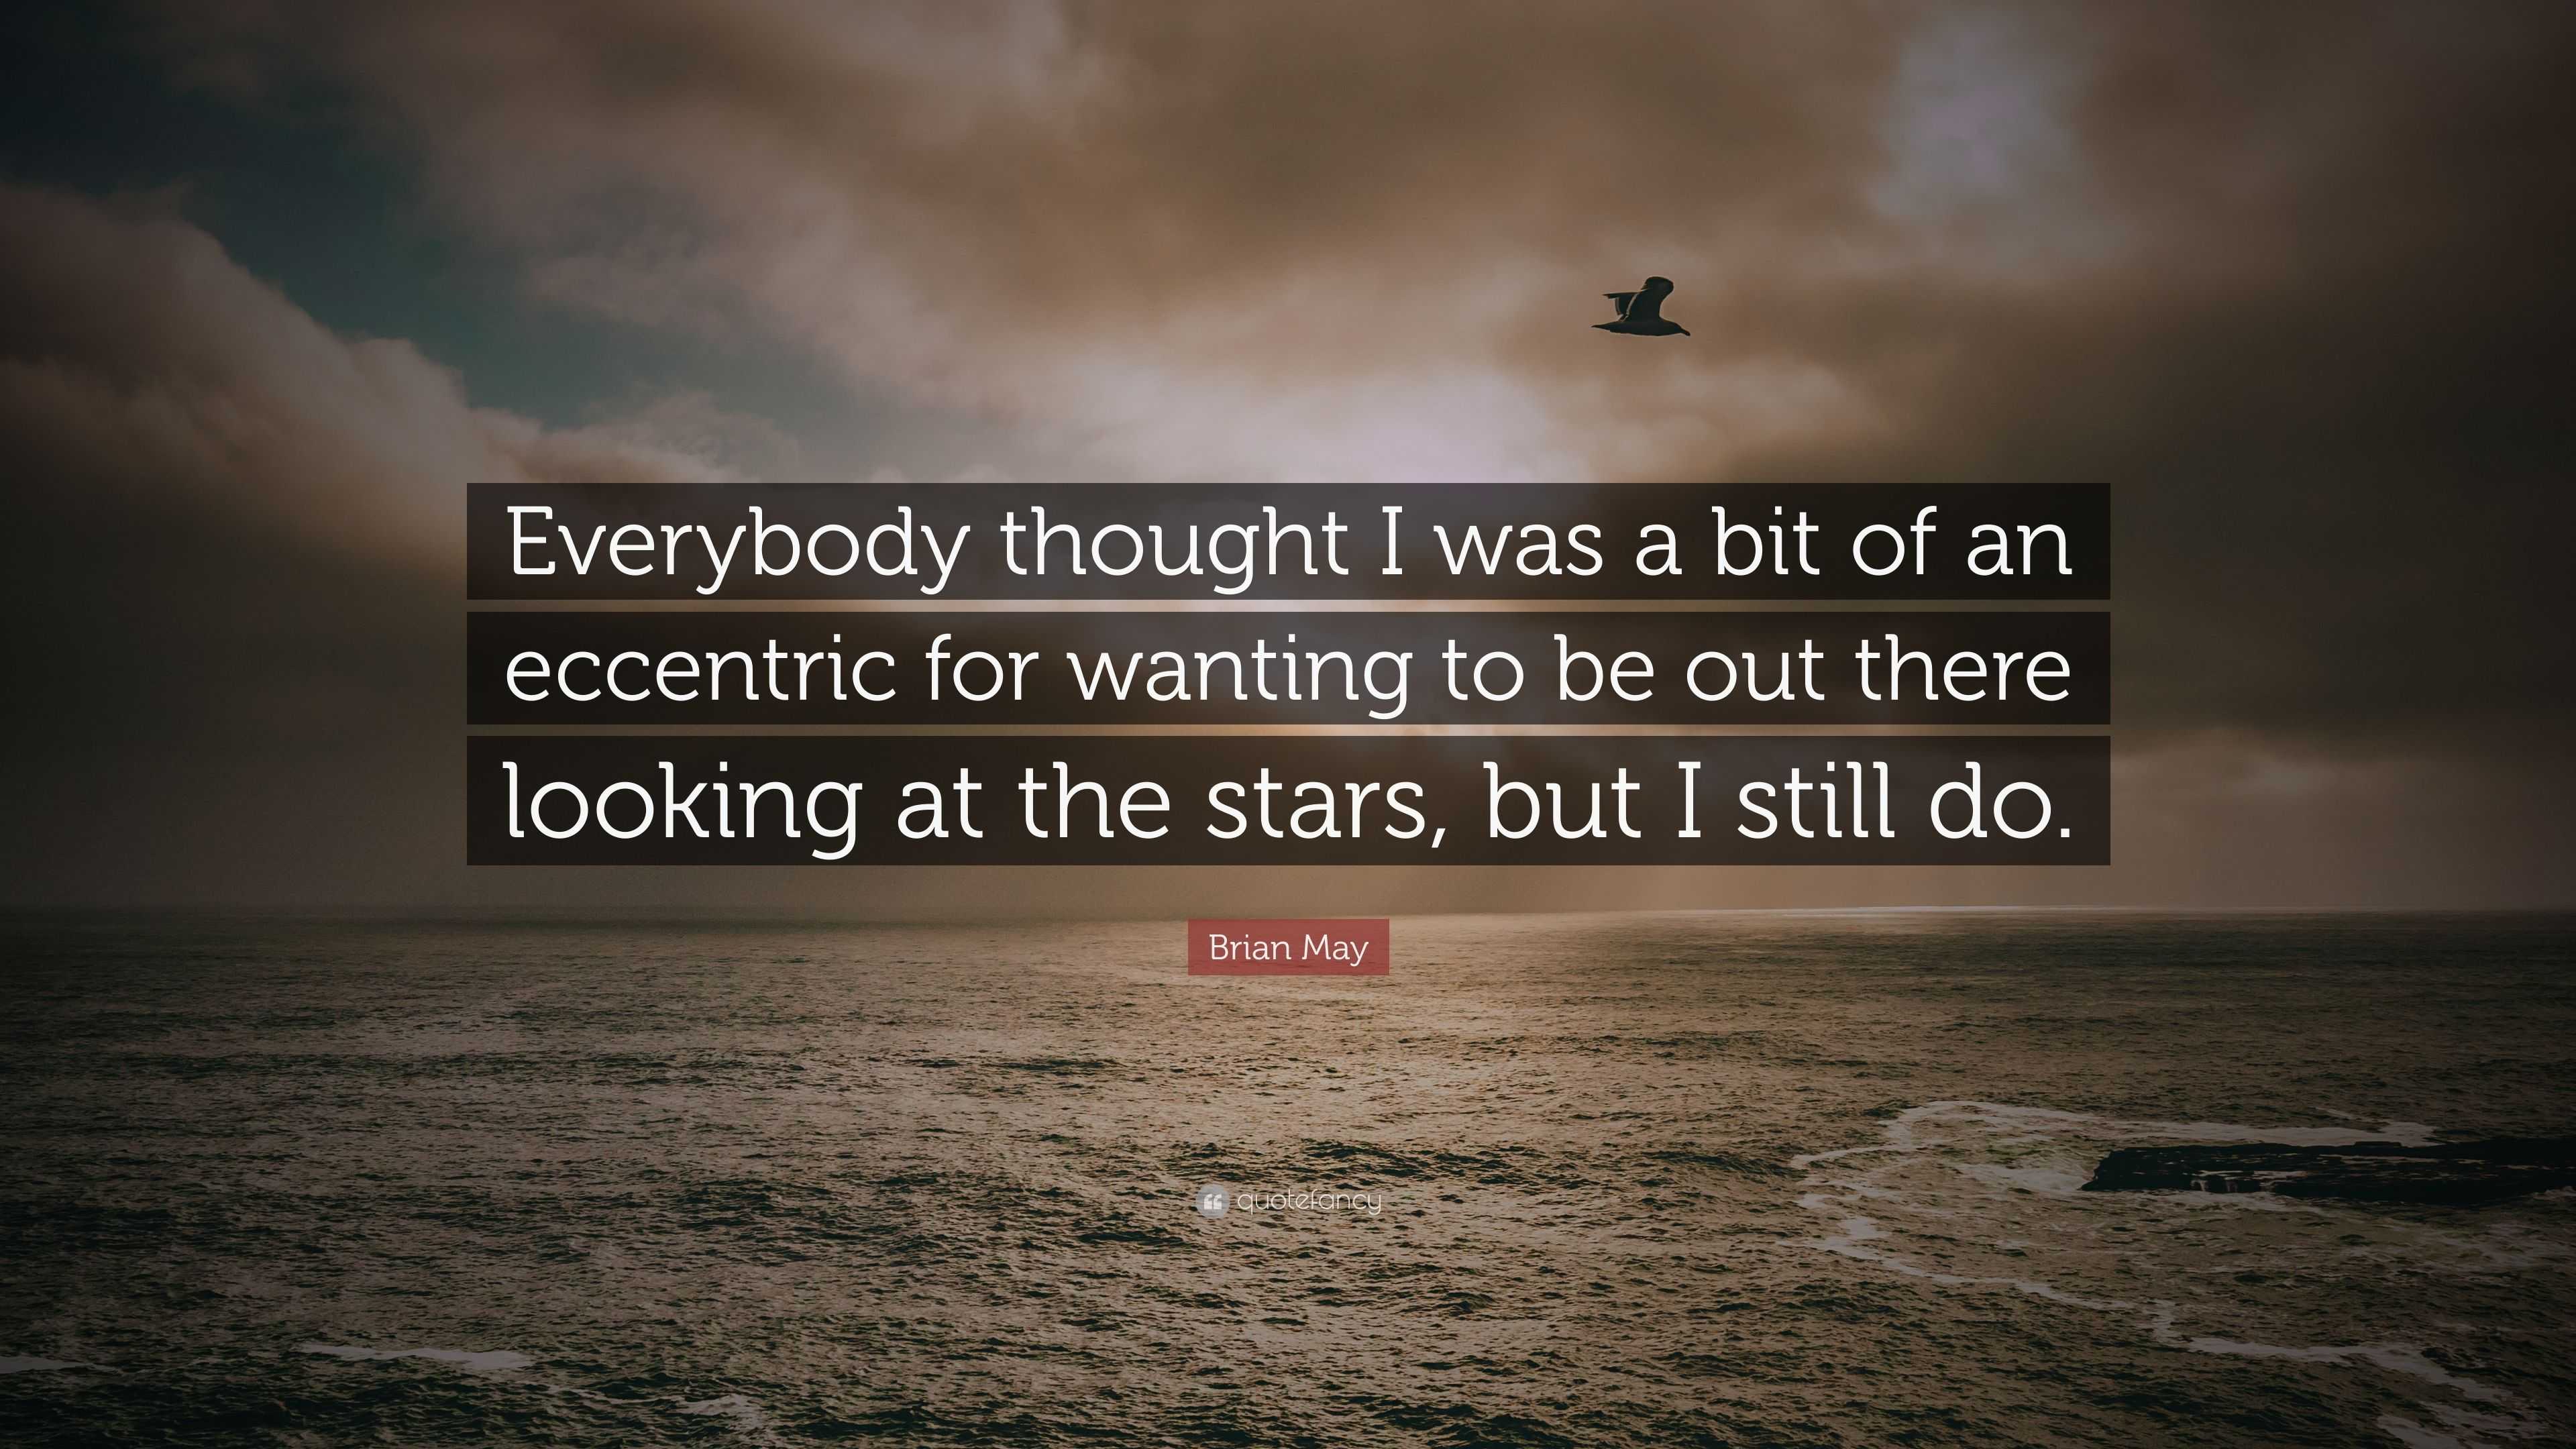 Brian May Quote: “Everybody thought I was a bit of an eccentric for ...